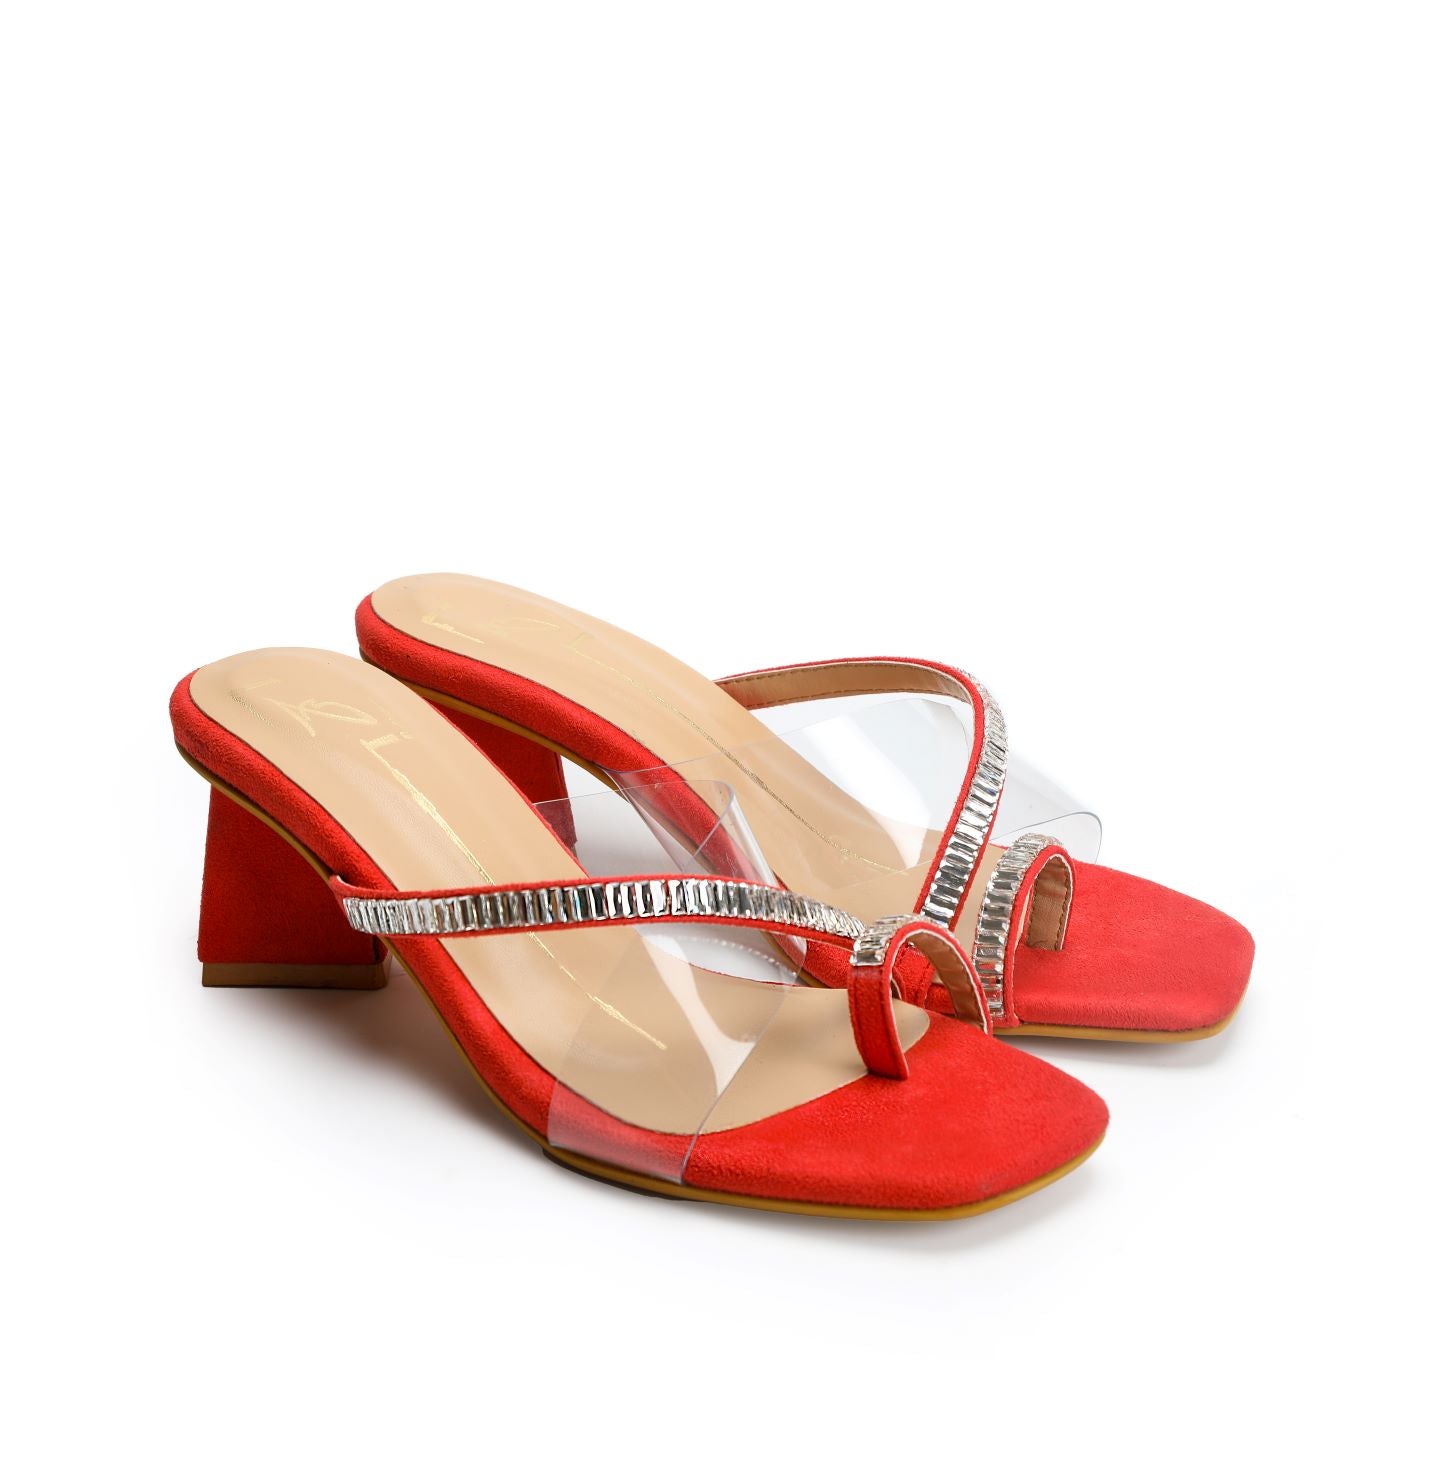 Red Suede Open Toe Chunky Heels Buckle Ankle Strap Sandals|FSJshoes